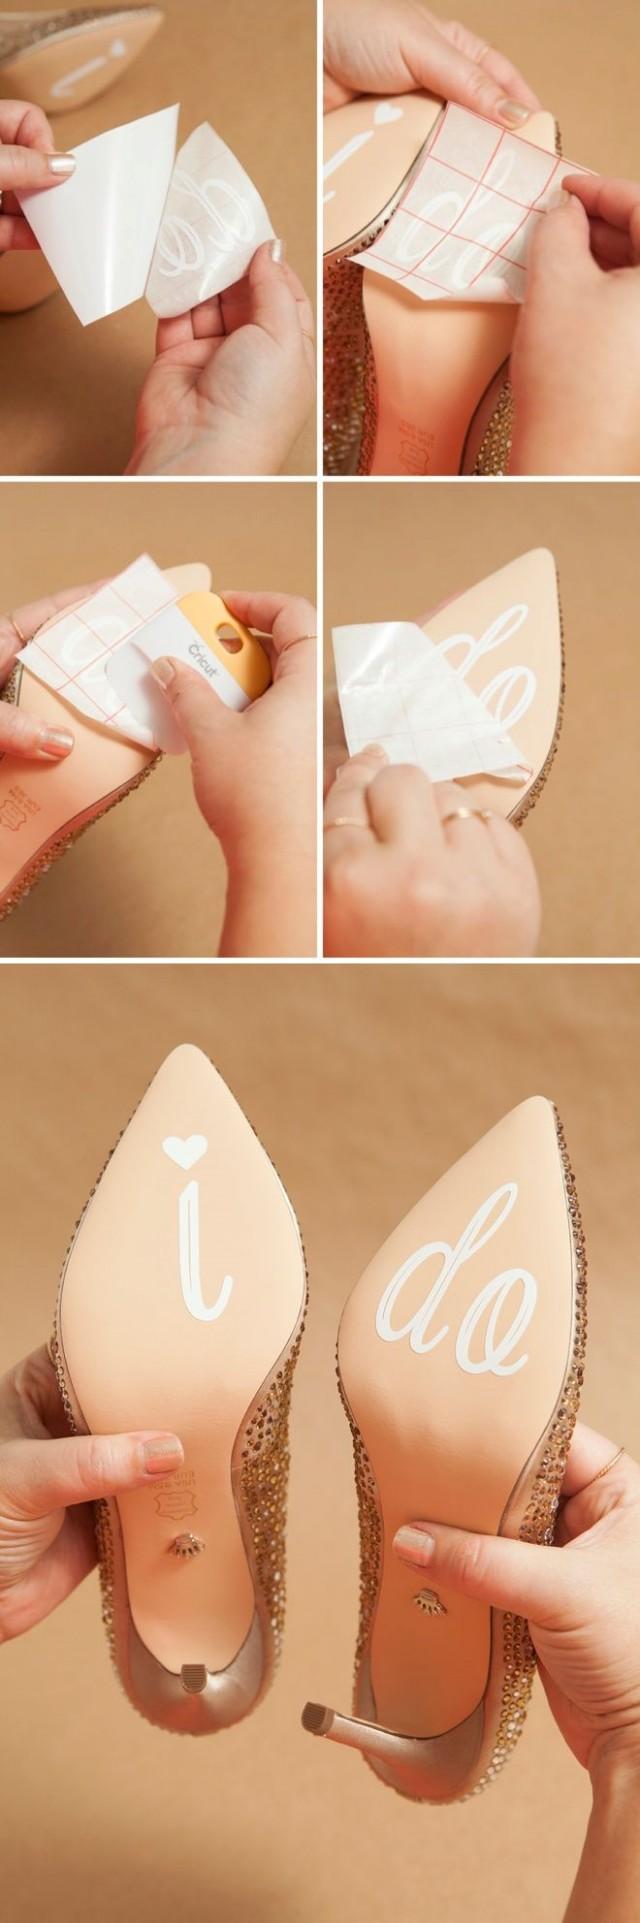 Learn How To Make Your Own Custom, Wedding Shoe Stickers!